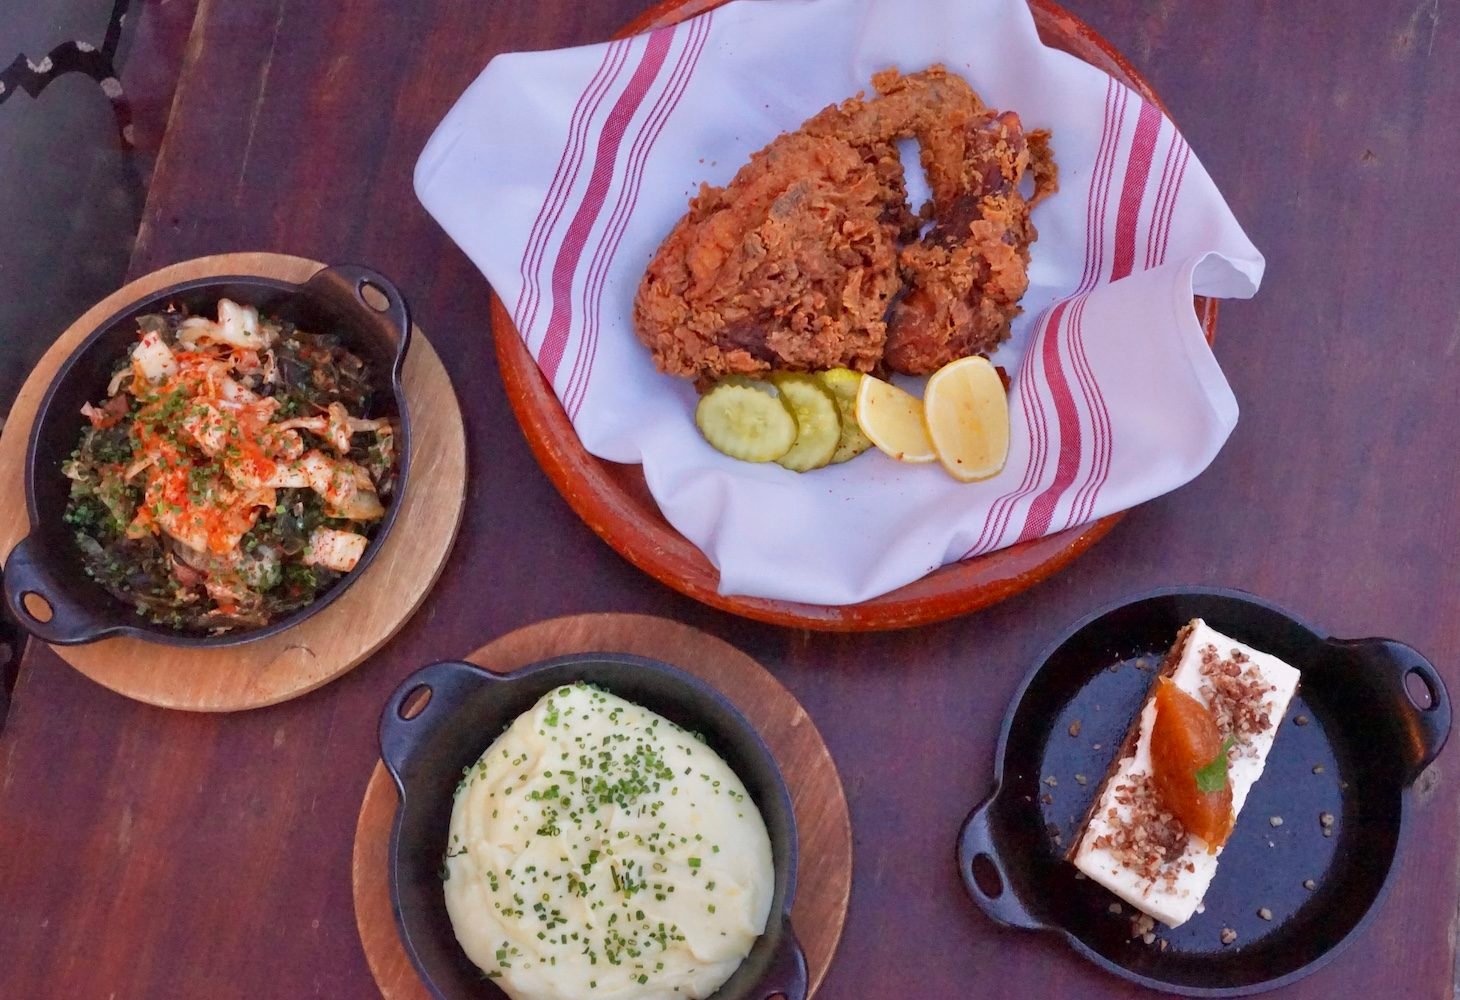 Mintwood Place in Adams Morgan will start serving Southern comfort food every Sunday. Photo courtesy of Mintwood Place.